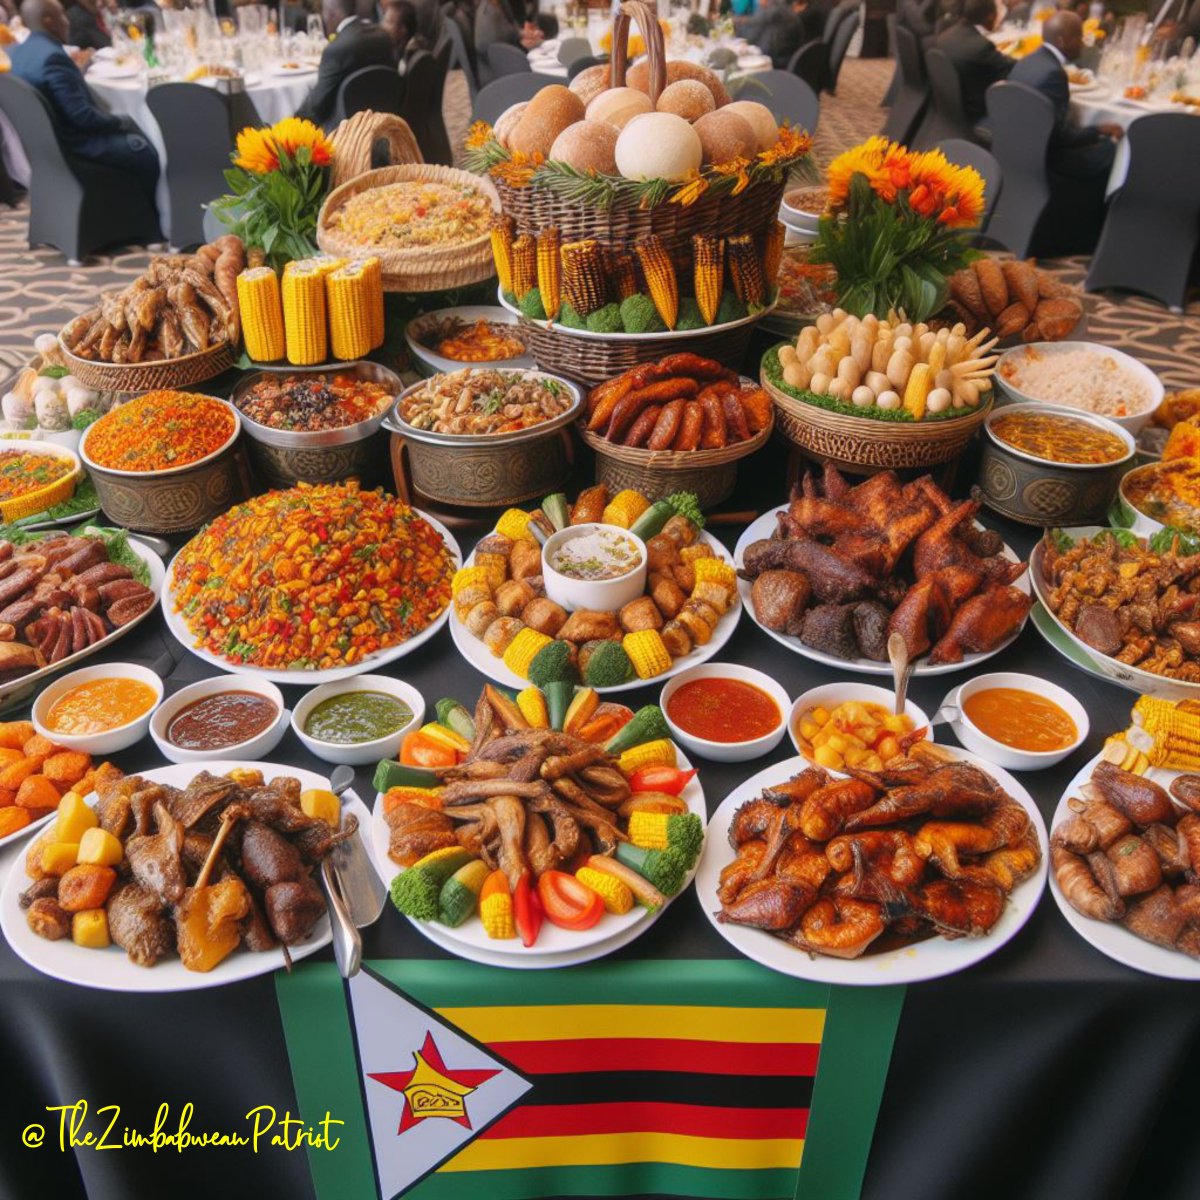 Victoria Falls to host UN Tourism African Gastronomy Tourism Forum from July 26-28, 2024! A big win for Zimbabwe's tourism industry, thanks to First Lady Auxillia Mnangagwa's efforts! Let's showcase our traditional cuisine to the world! #UNTourism #GastronomyForum #Zimbabwe